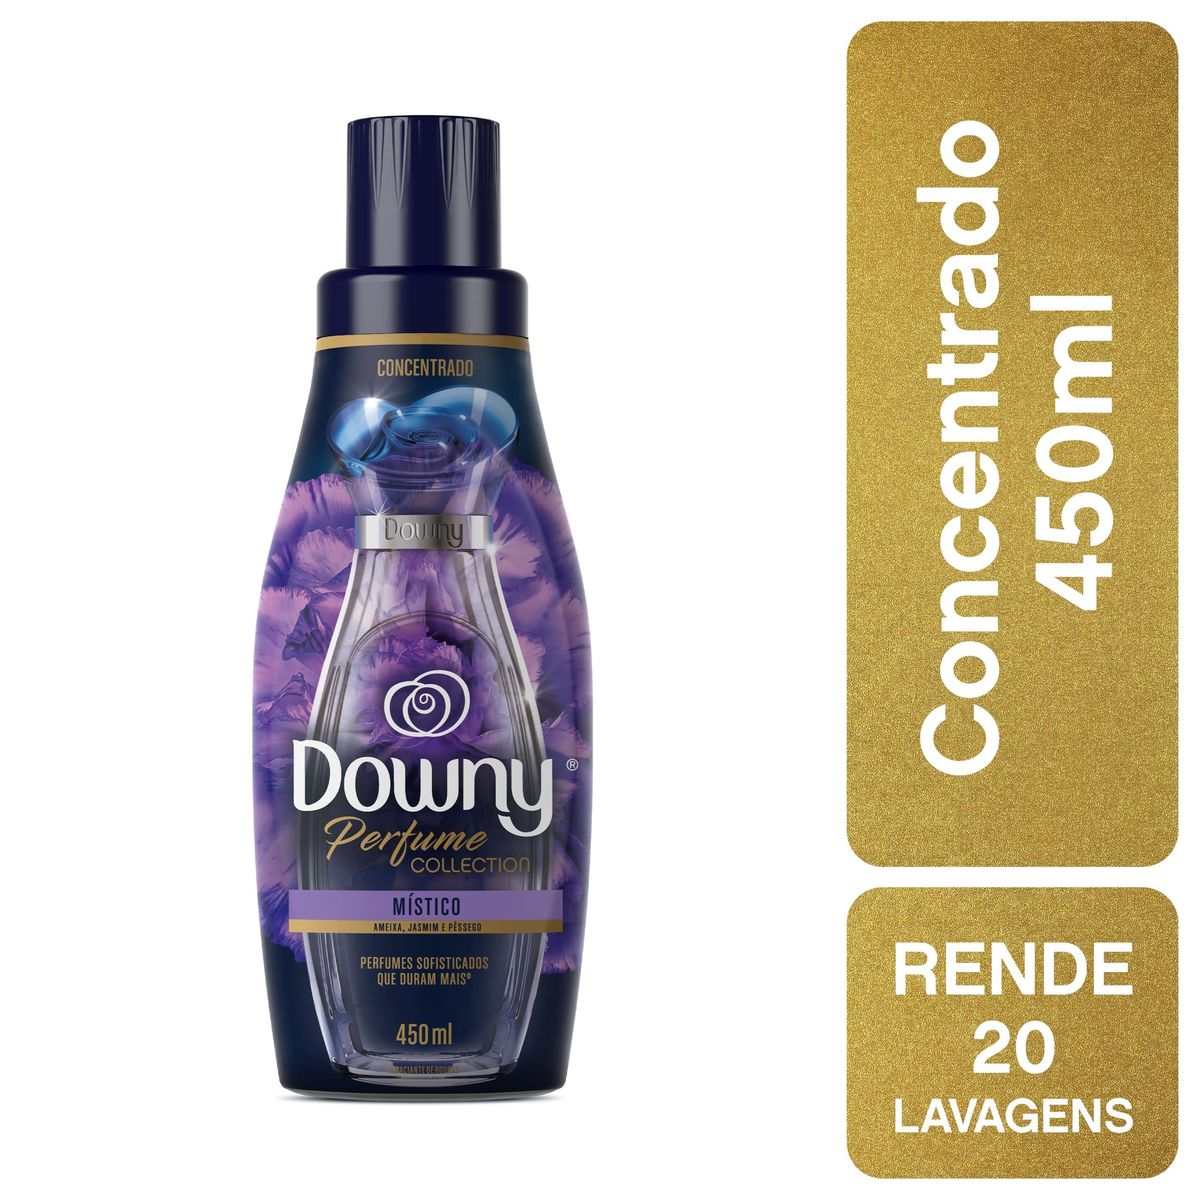 Amaciante Conc. Downy Perfume Collection Místico 450ml image number 1